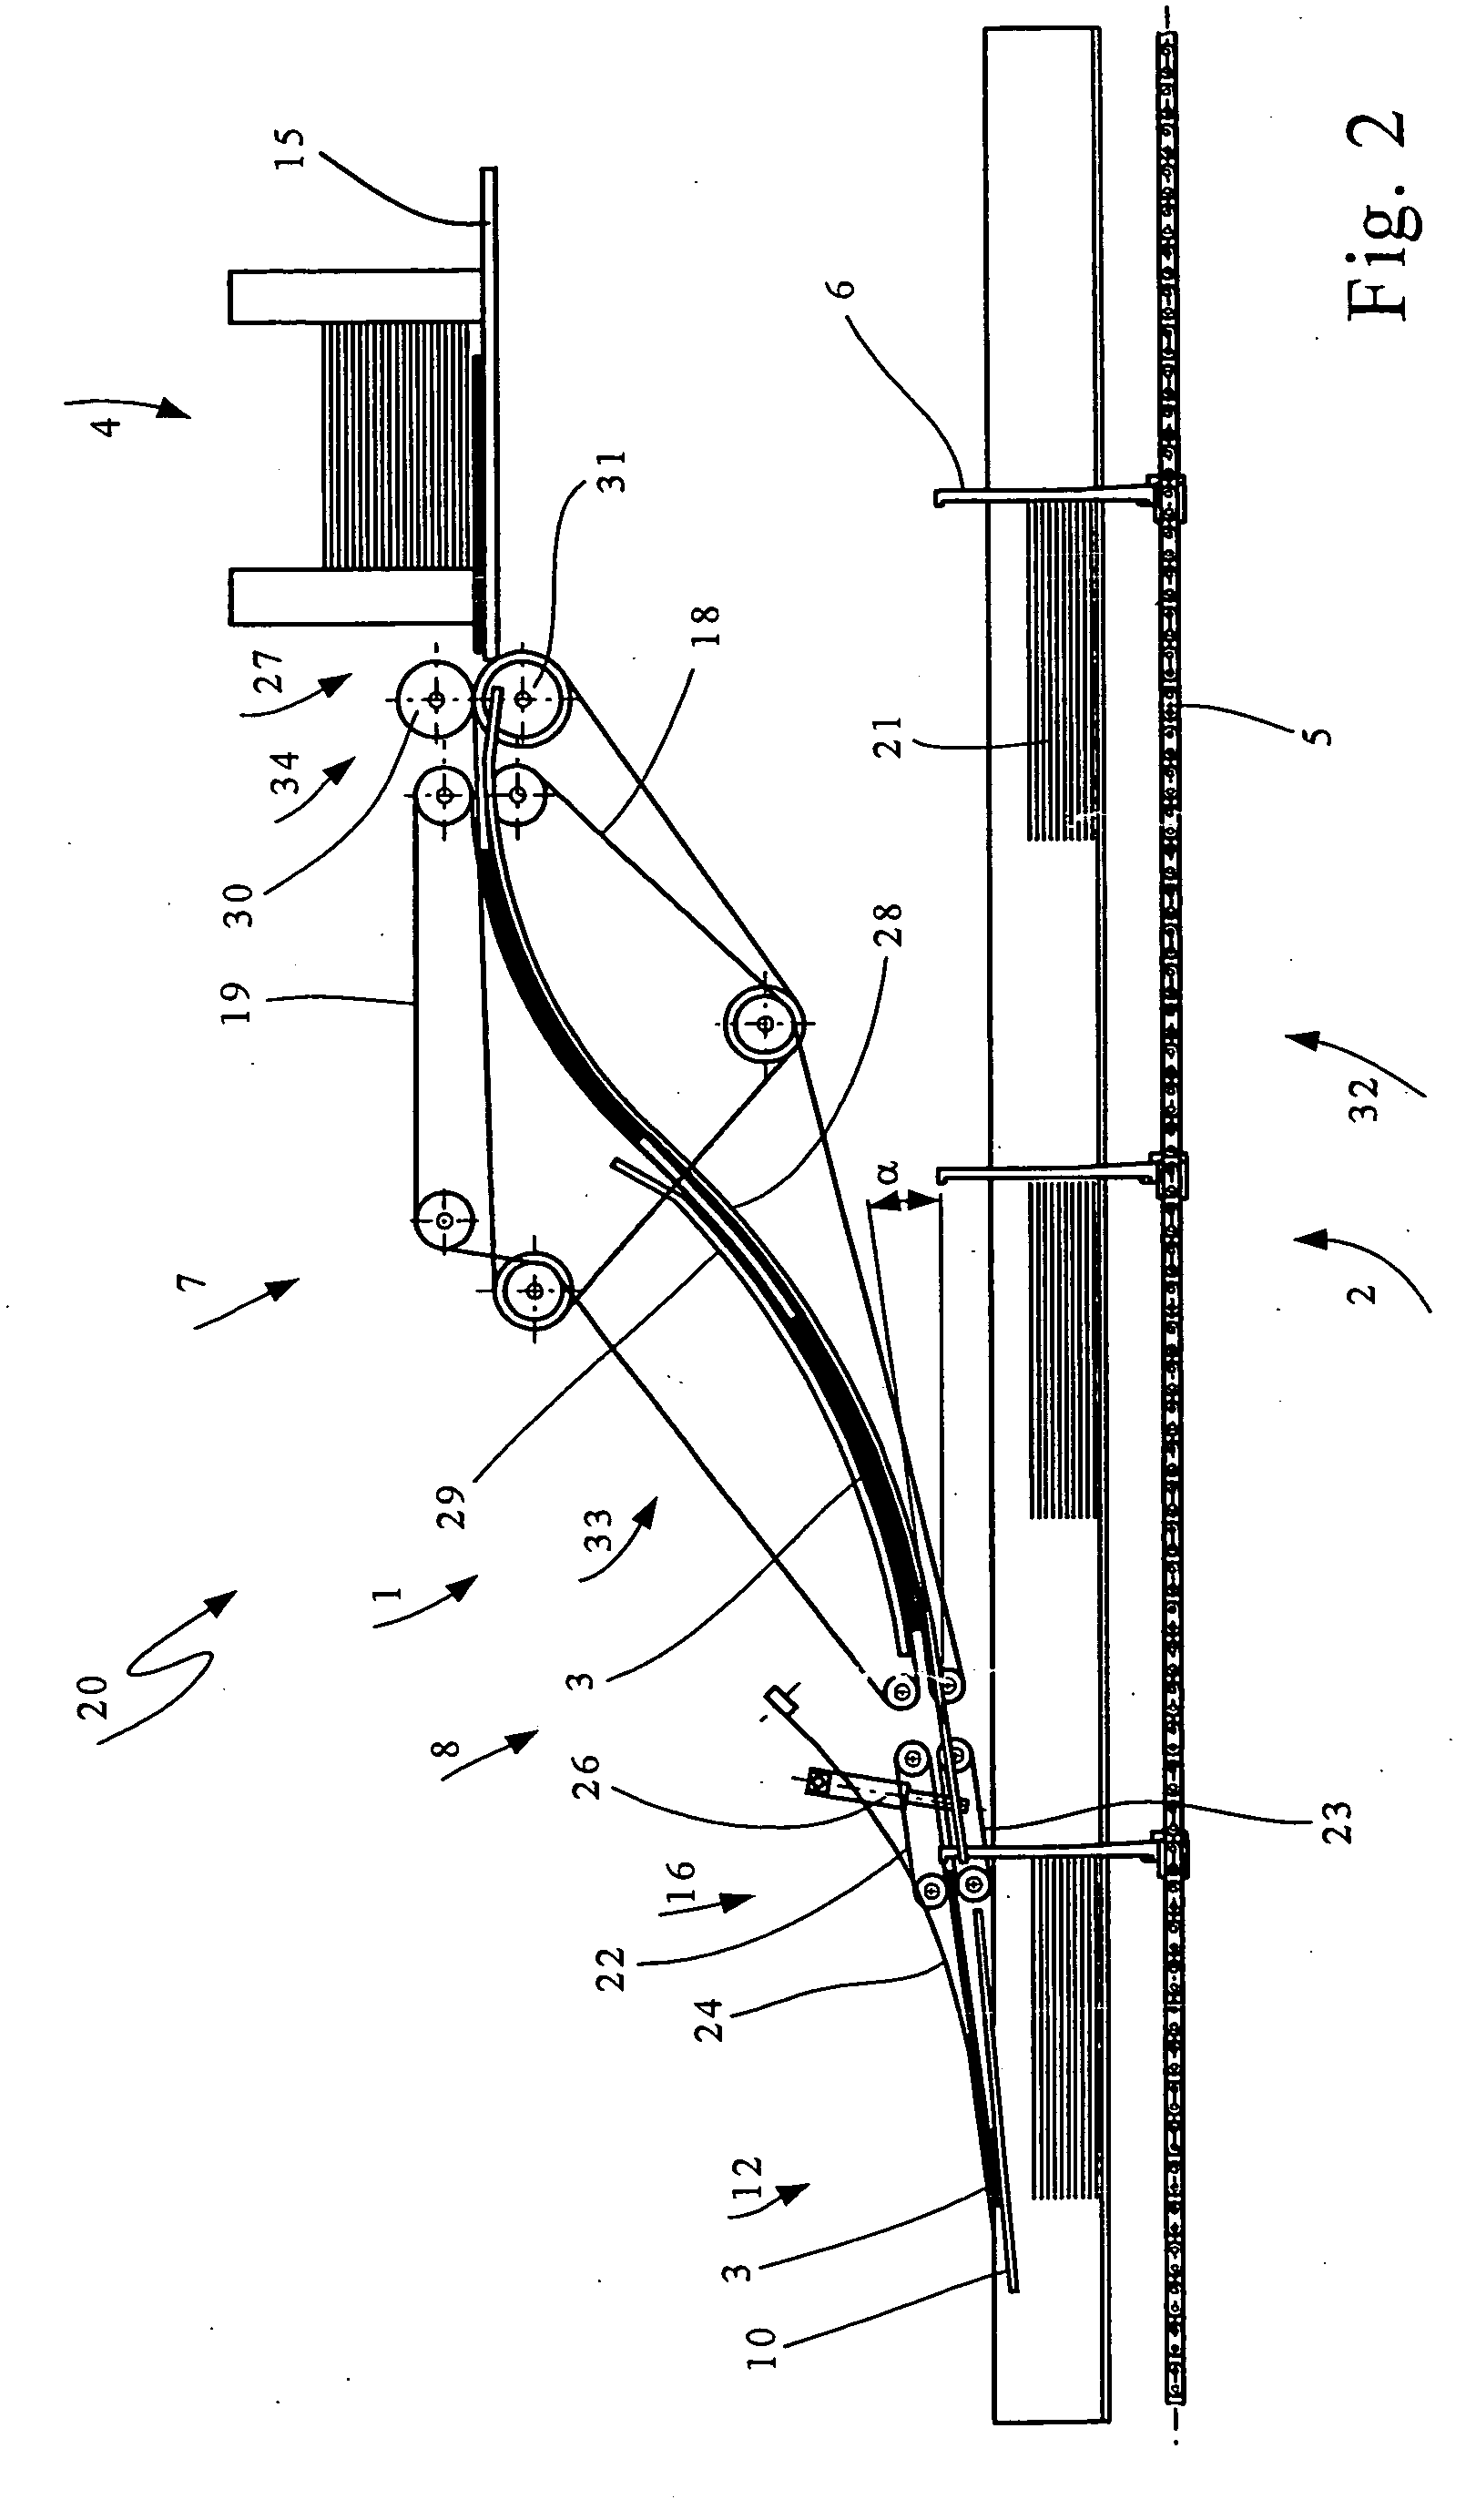 Apparatus for gathering signatures along a conveying section of a circulating conveyor